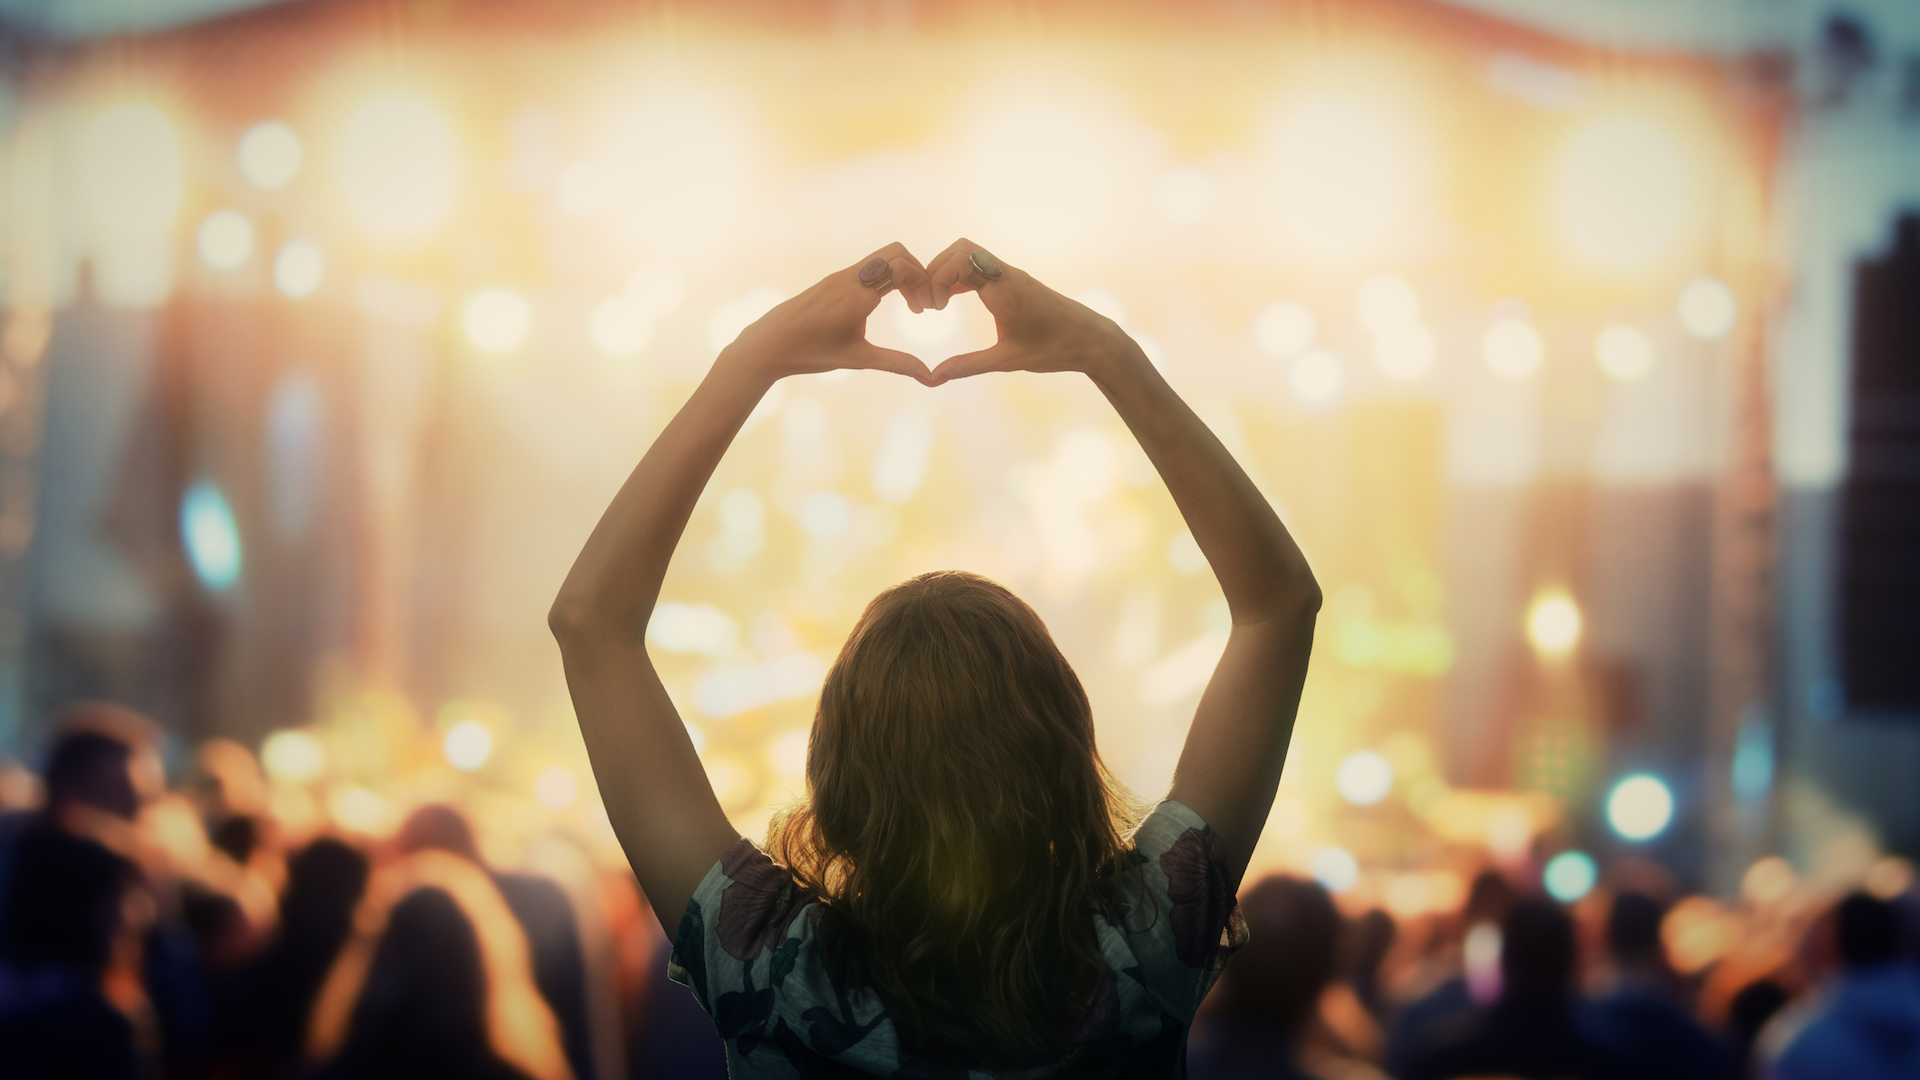 A person making a heart shape with their hands a pop concert